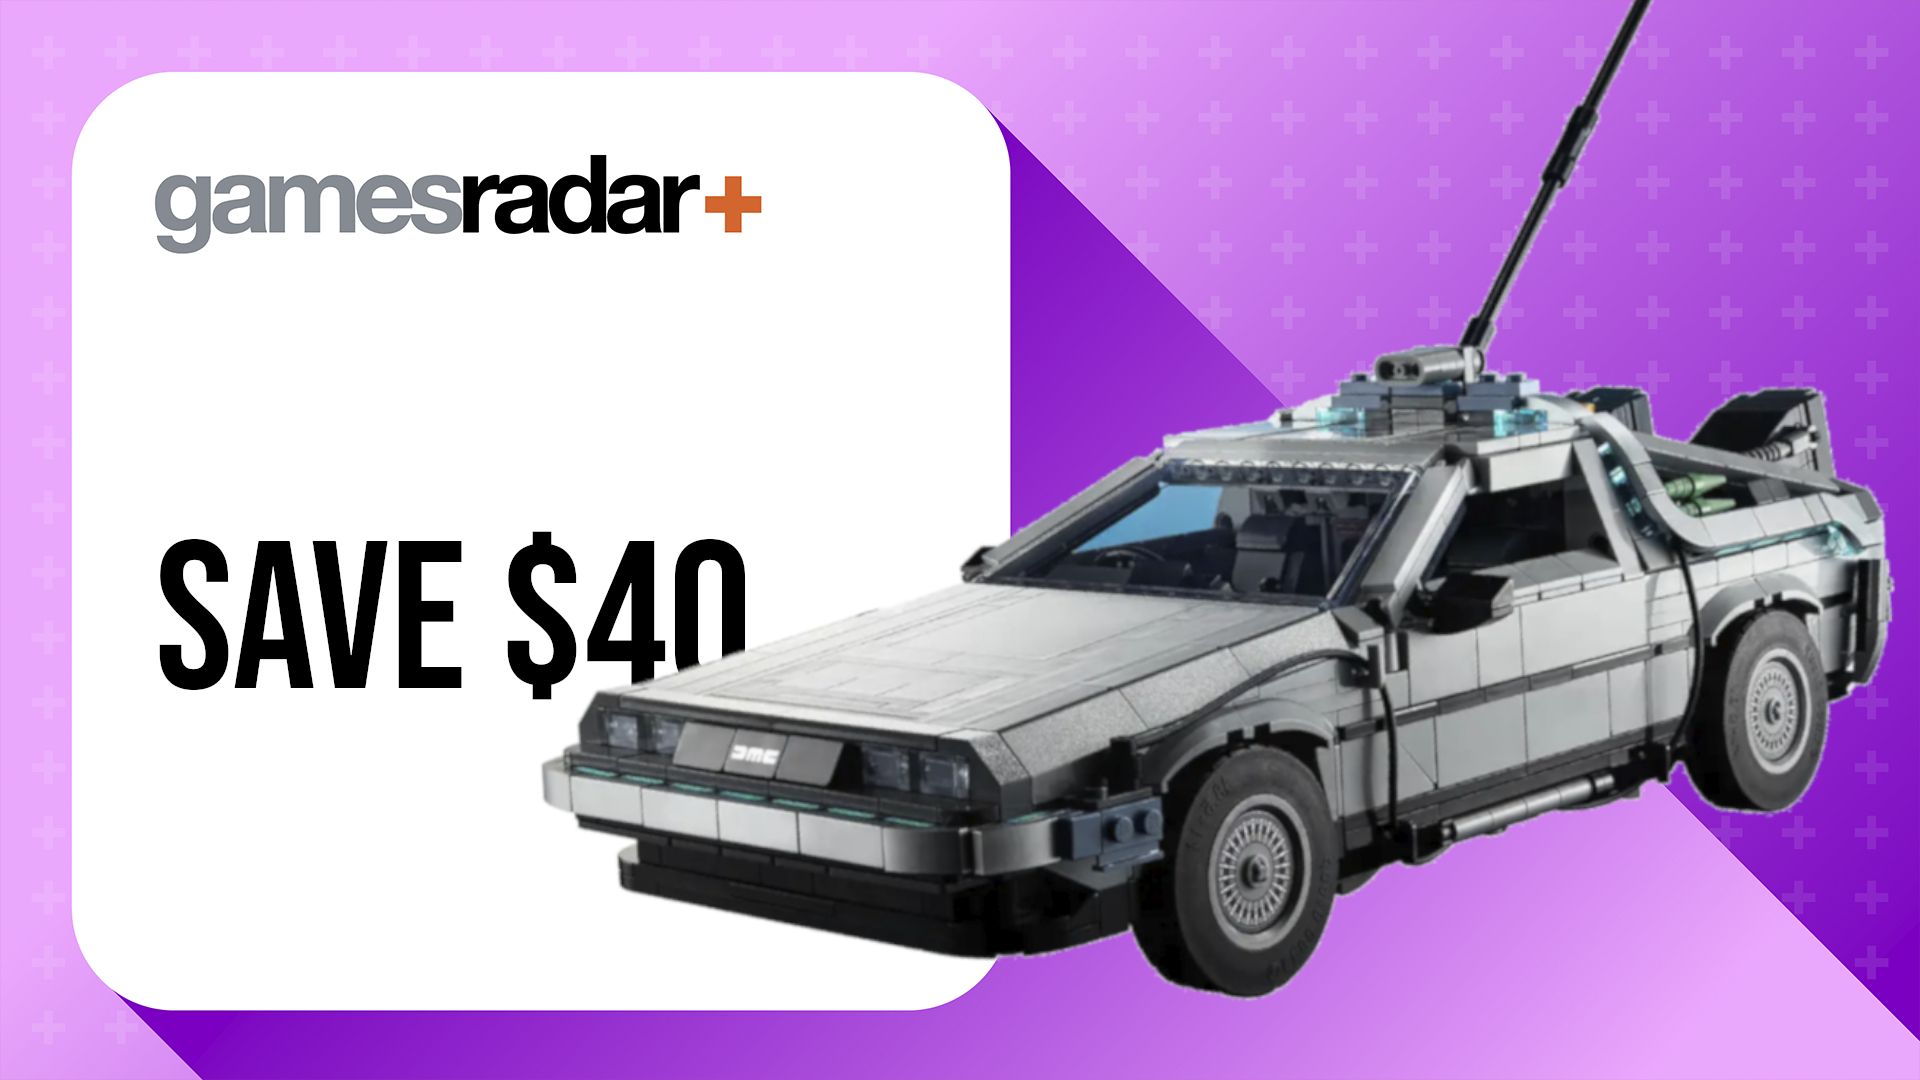 Cyber Monday Lego deals with Back to the Future DeLorean